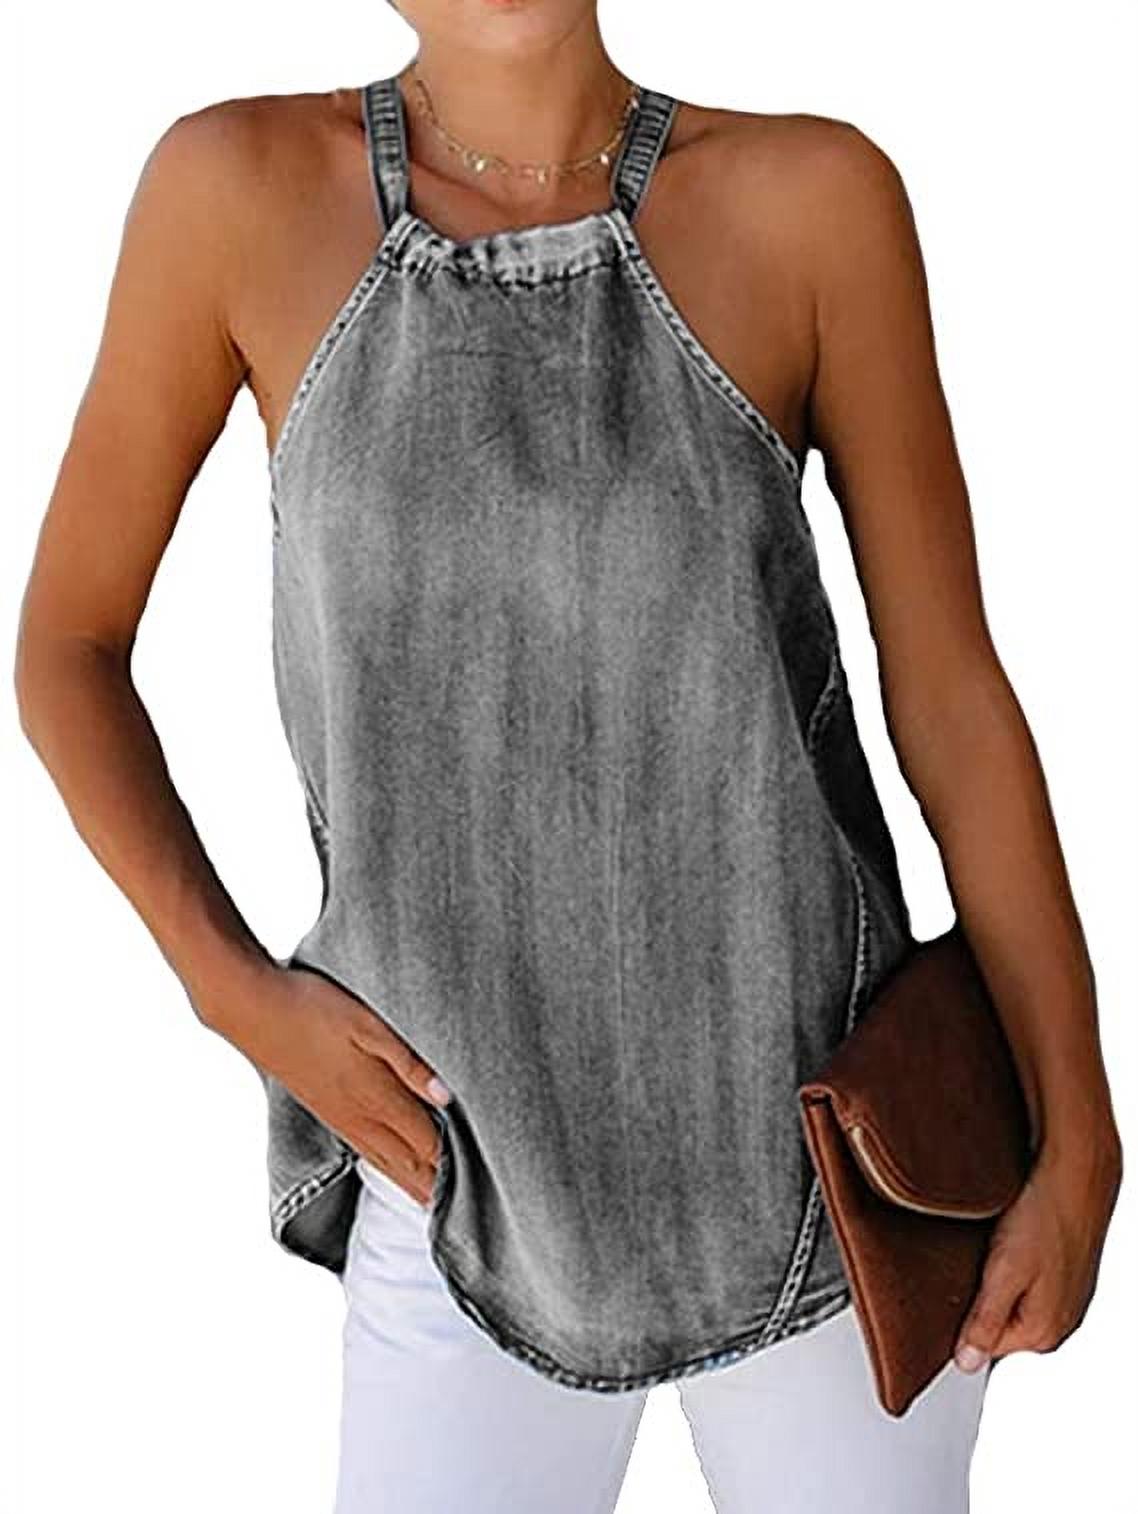 Women Lady Sexy Halter Denim Vest Summer Sleeveless Casual Off-shoulder Backless Lace Tank Tops - image 1 of 5